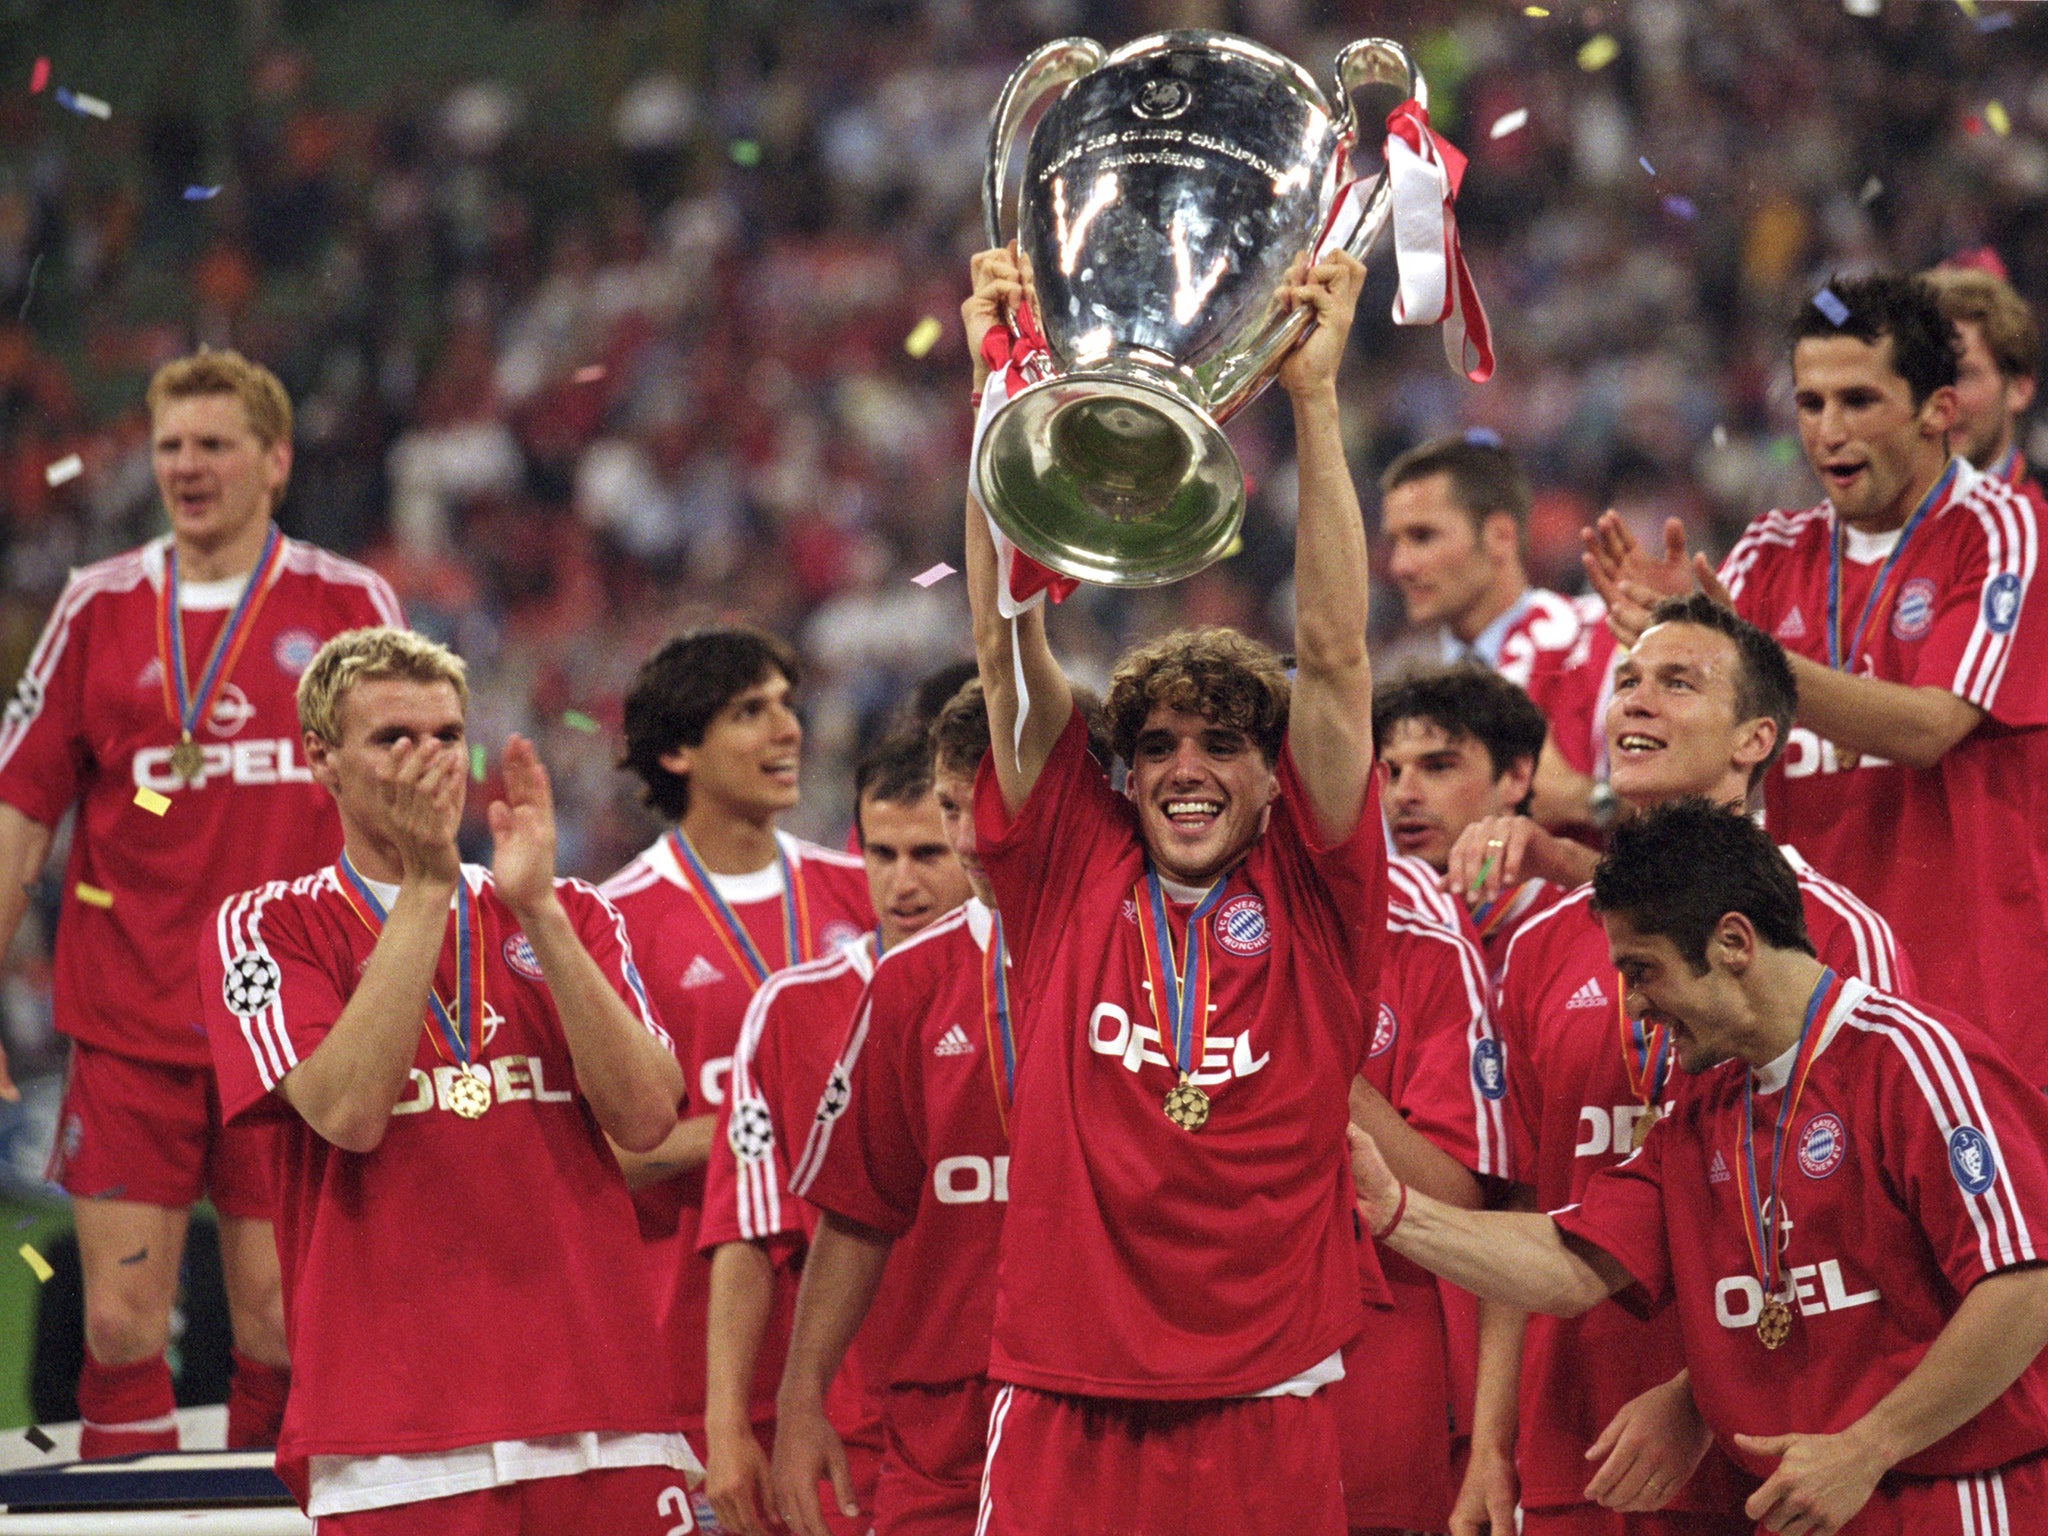 Hargreaves won four Bundesliga titles and the Champions League in 10 years at Bayern Munich